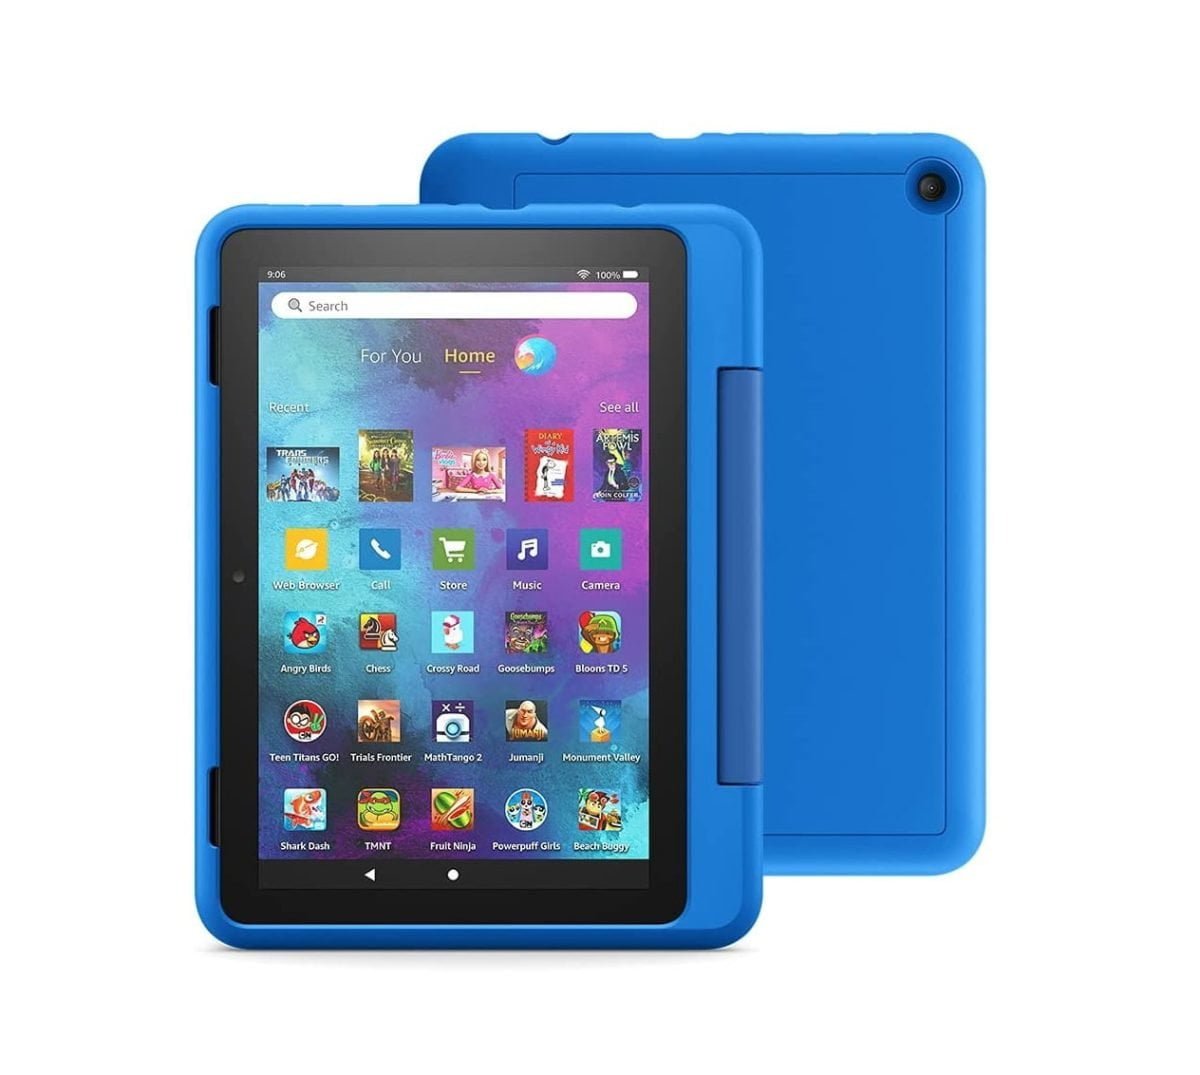 61Pzltjm7Ys. Ac Sl1000 Amazon &Amp;Lt;H1&Amp;Gt;Amazon Fire Hd 8 Kids Pro Tablet 10Th Gen, 8&Amp;Quot; Hd, Ages 6–12, 32 Gb, Sky Blue&Amp;Lt;/H1&Amp;Gt; &Amp;Lt;Ul&Amp;Gt; &Amp;Lt;Li&Amp;Gt;&Amp;Lt;Span Class=&Amp;Quot;A-List-Item&Amp;Quot;&Amp;Gt;He Web Browser Comes With Built-In Controls Designed To Help Filter Out Inappropriate Sites And Let Parents Add Or Block Specific Websites At Any Time. &Amp;Lt;/Span&Amp;Gt;&Amp;Lt;/Li&Amp;Gt; &Amp;Lt;Li&Amp;Gt;&Amp;Lt;Span Class=&Amp;Quot;A-List-Item&Amp;Quot;&Amp;Gt; Stay In Touch – Kids Can Send Announcements And Make Voice And Video Calls Over Wifi To Approved Contacts With An Alexa-Enabled Device Or The Alexa App. &Amp;Lt;/Span&Amp;Gt;&Amp;Lt;/Li&Amp;Gt; &Amp;Lt;Li&Amp;Gt;&Amp;Lt;Span Class=&Amp;Quot;A-List-Item&Amp;Quot;&Amp;Gt; Features A Quad-Core Processor, 2 Gb Ram, 8&Amp;Quot; Hd Display, Dual Cameras, Usb-C (2.0) Port, And Up To 1 Tb Of Expandable Storage.&Amp;Lt;/Span&Amp;Gt;&Amp;Lt;/Li&Amp;Gt; &Amp;Lt;/Ul&Amp;Gt; &Amp;Nbsp; Fire Hd 8 Amazon Fire Hd 8 Kids Pro Tablet 10Th Gen, 8&Amp;Quot; Hd, Ages 6–12, 32 Gb, Sky Blue